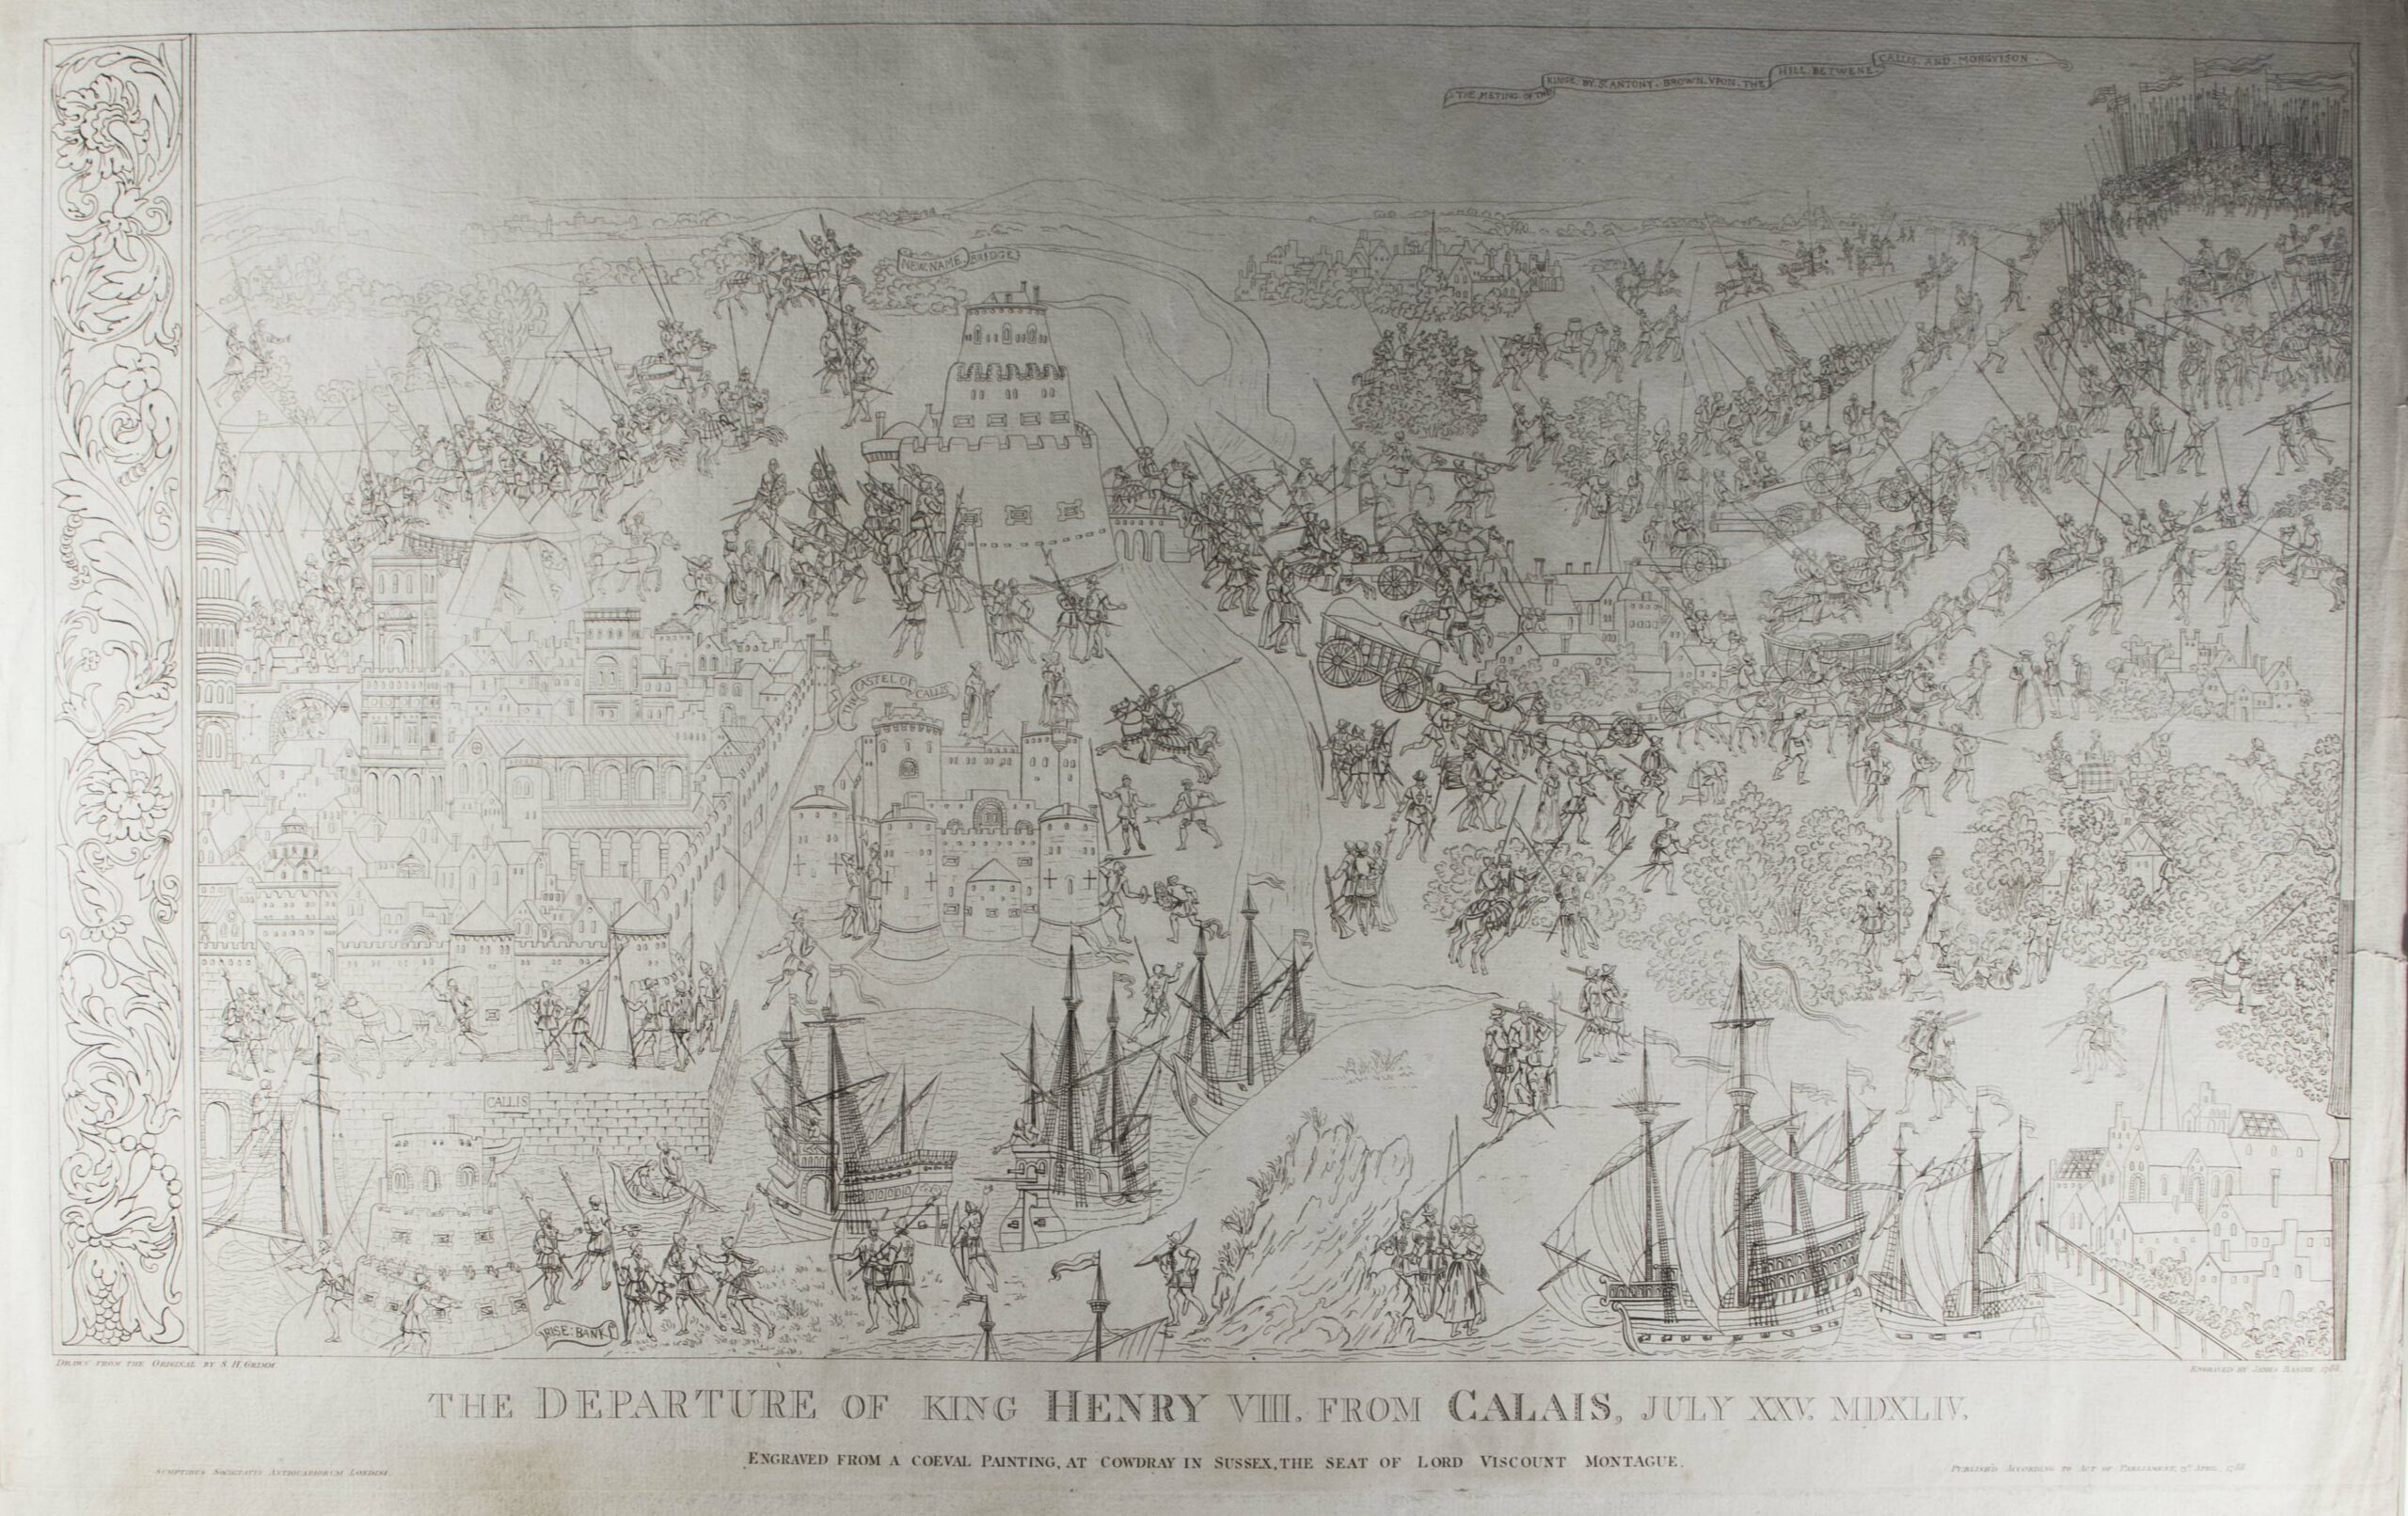 Print showing the Departure of Henry VIII from Calais